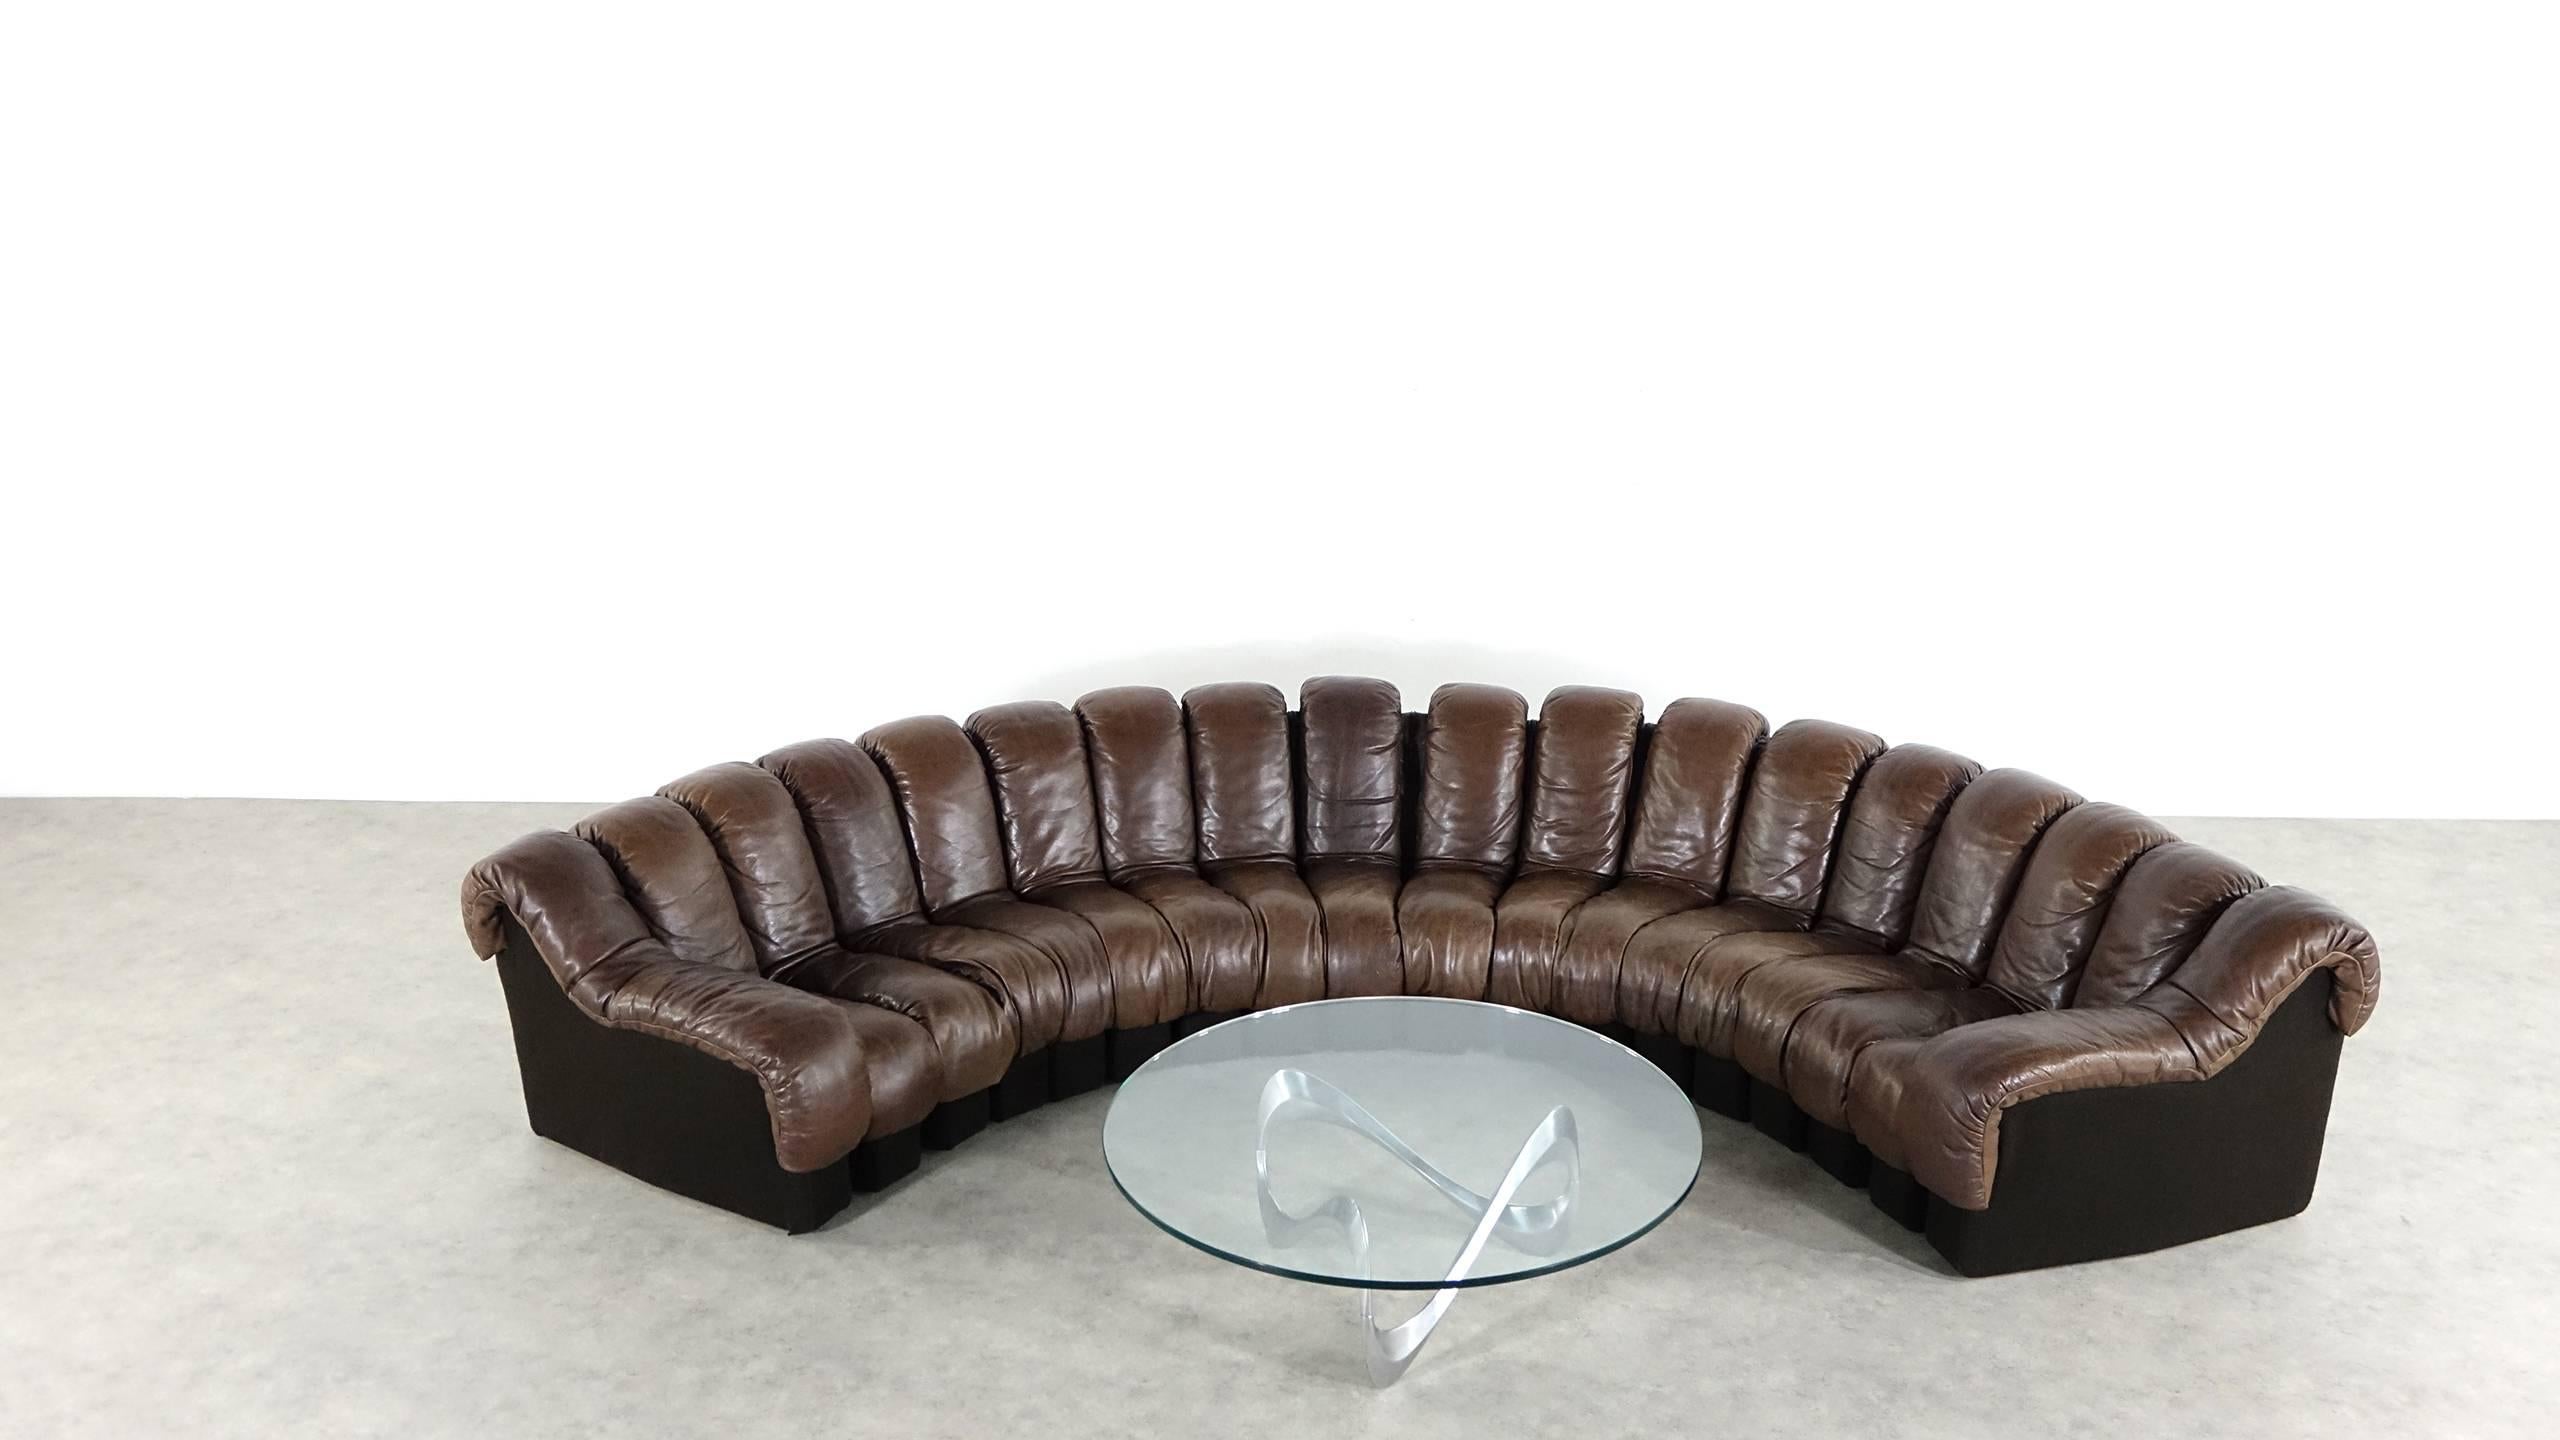 De Sede Ds 600 Sofa by Ueli Berger and Riva 1972, Chocolate Leather 18 Elements 4